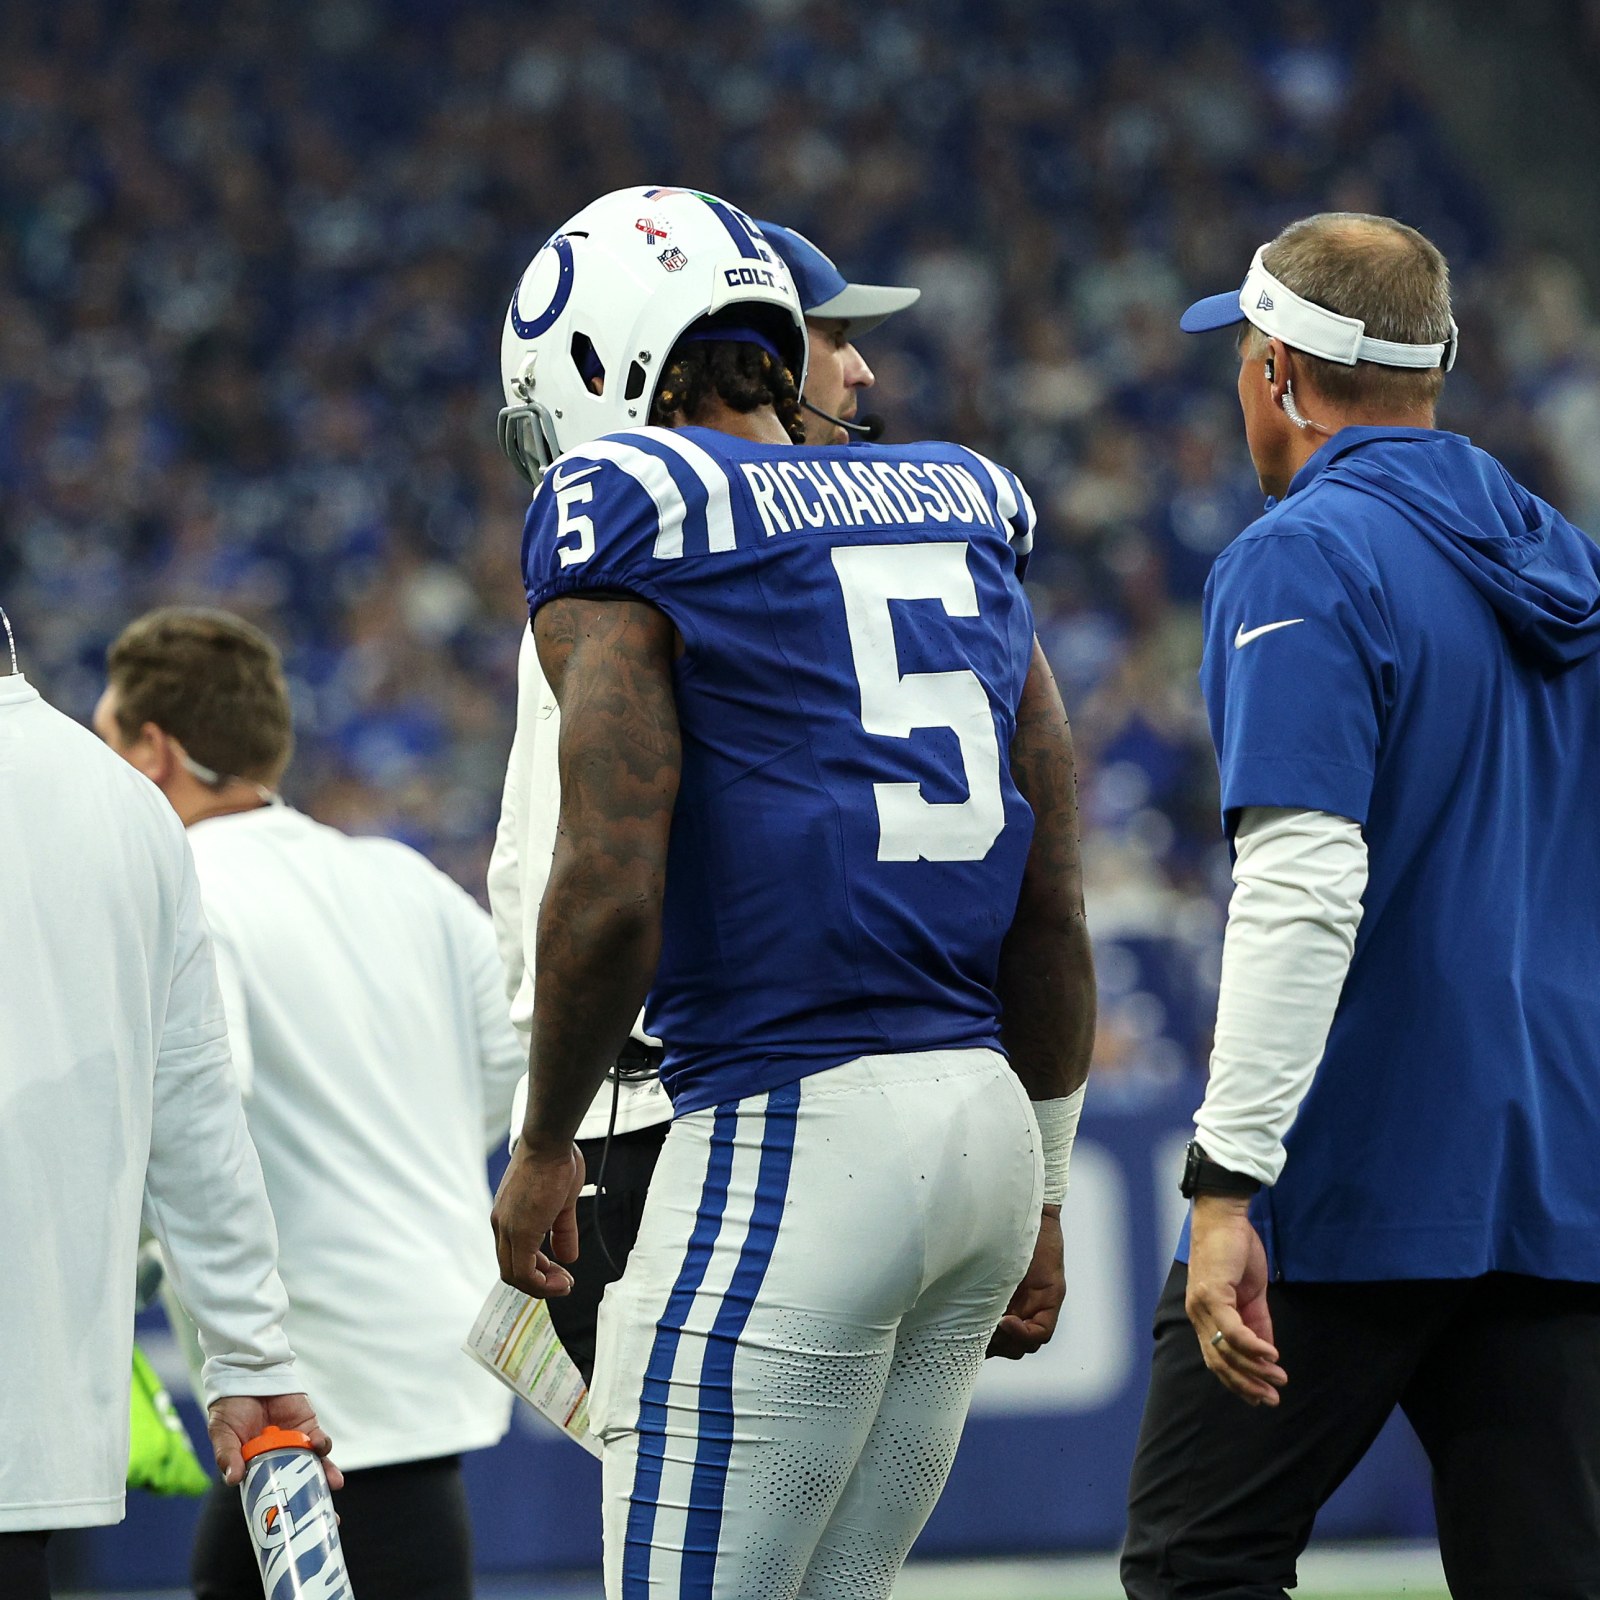 Richardson scores twice before leaving with concussion as Colts